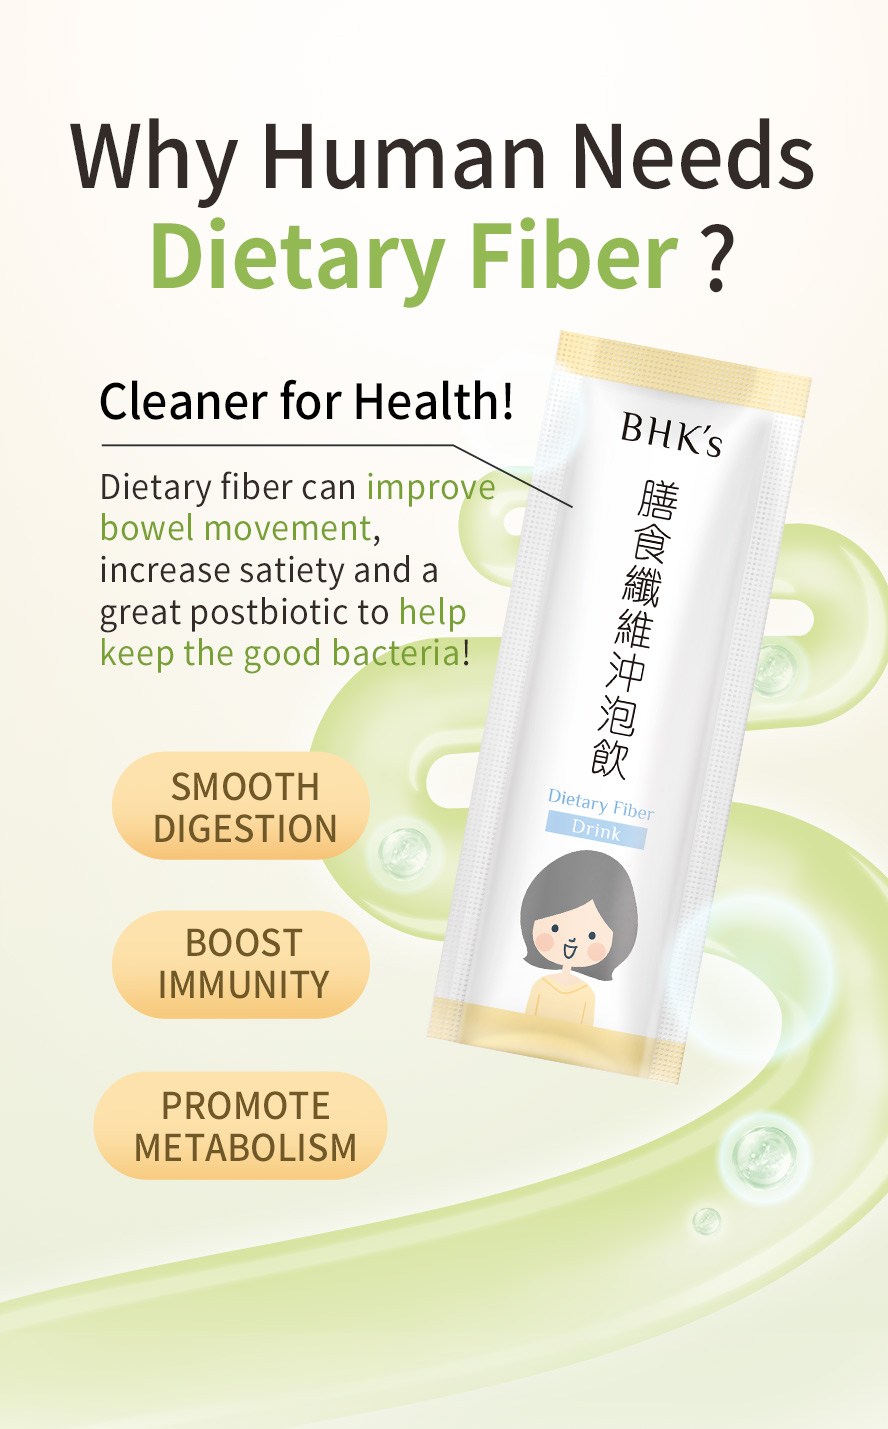 BHK's Dietary Fiber Drink can improve smooth digestion, boost immunity, and enhance metabolism